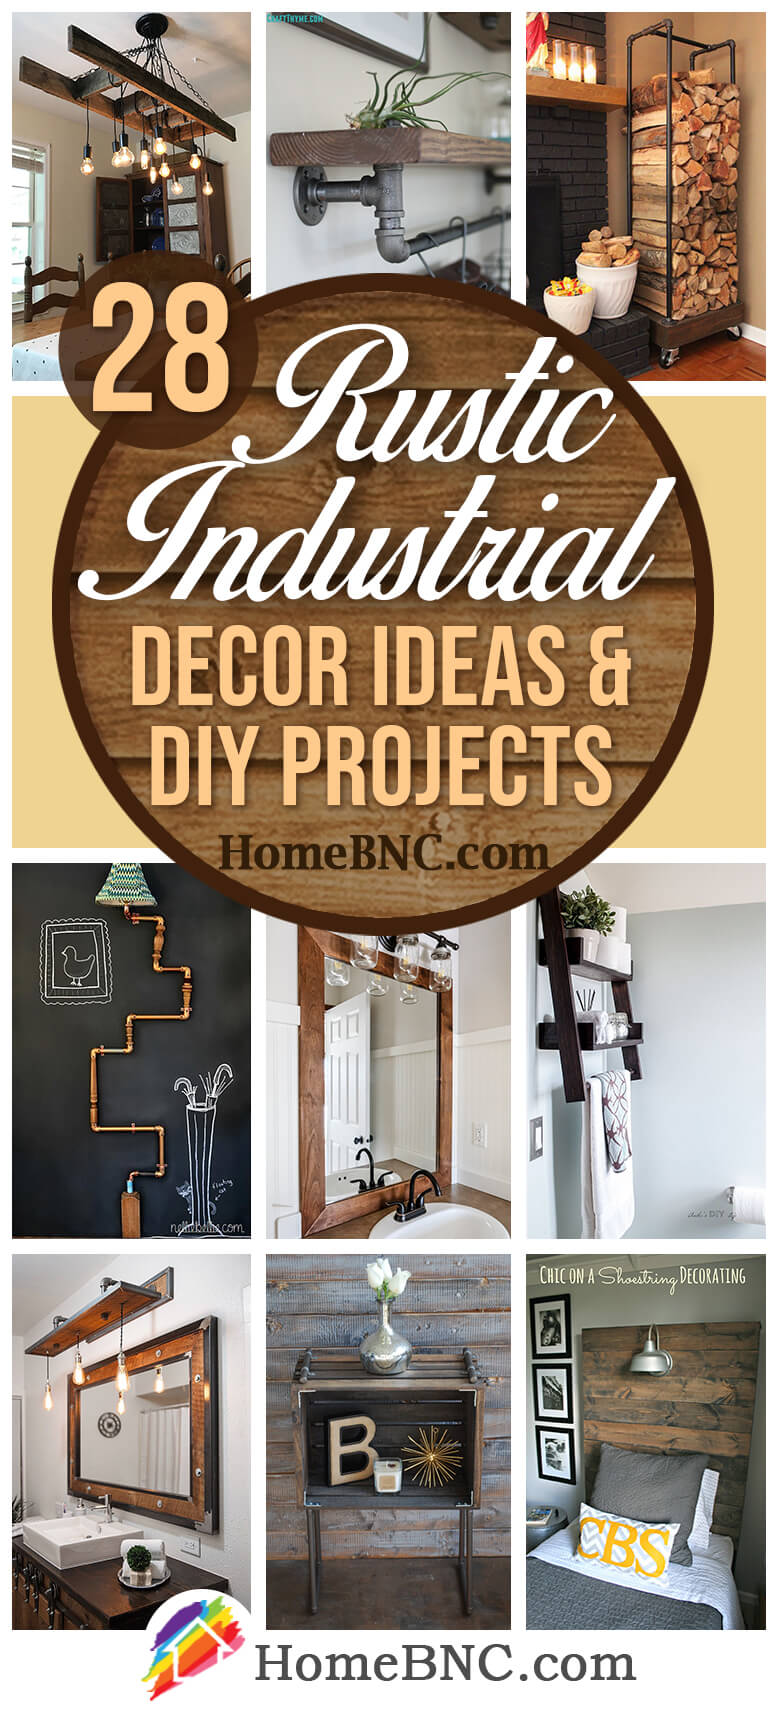 28 Best DIY Rustic Industrial Decor Ideas and Designs for 2021